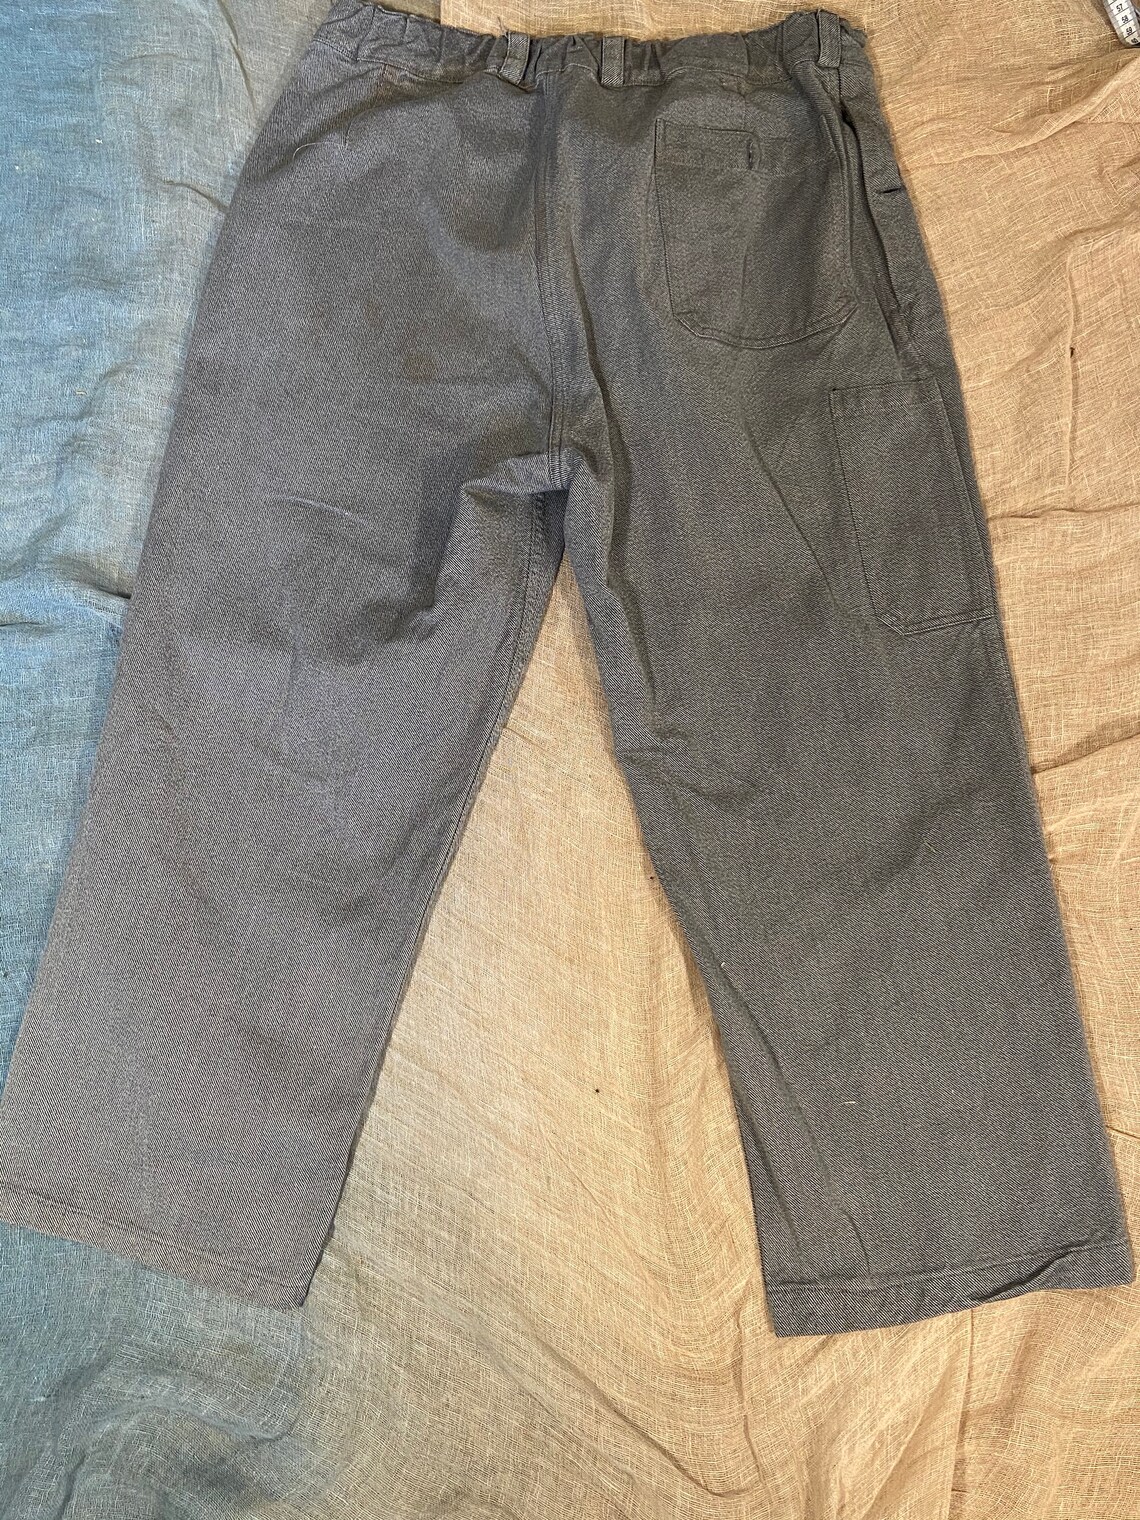 Grey Workwear Trousers With Pockets - Etsy UK